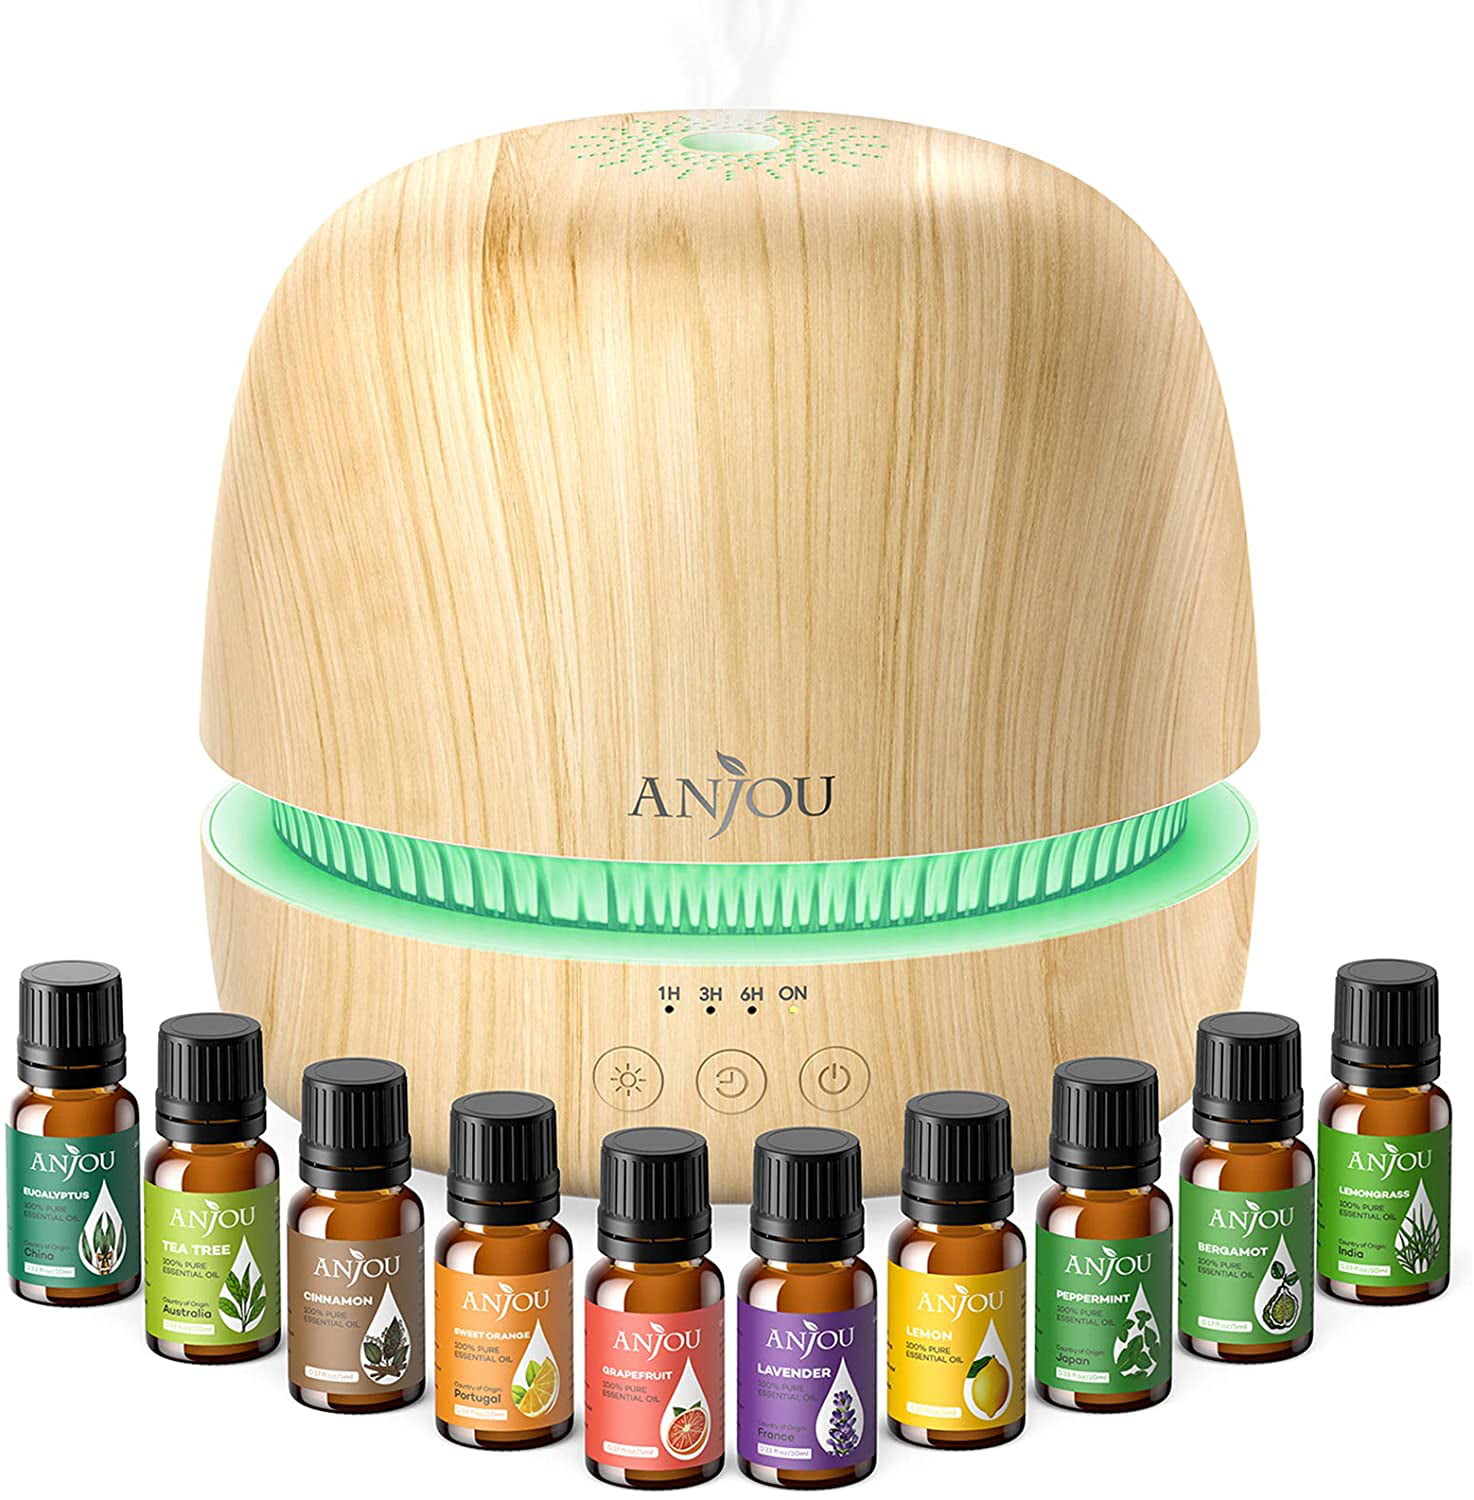 Anjou Essential Oil Diffuser Gift Set 2rd Version